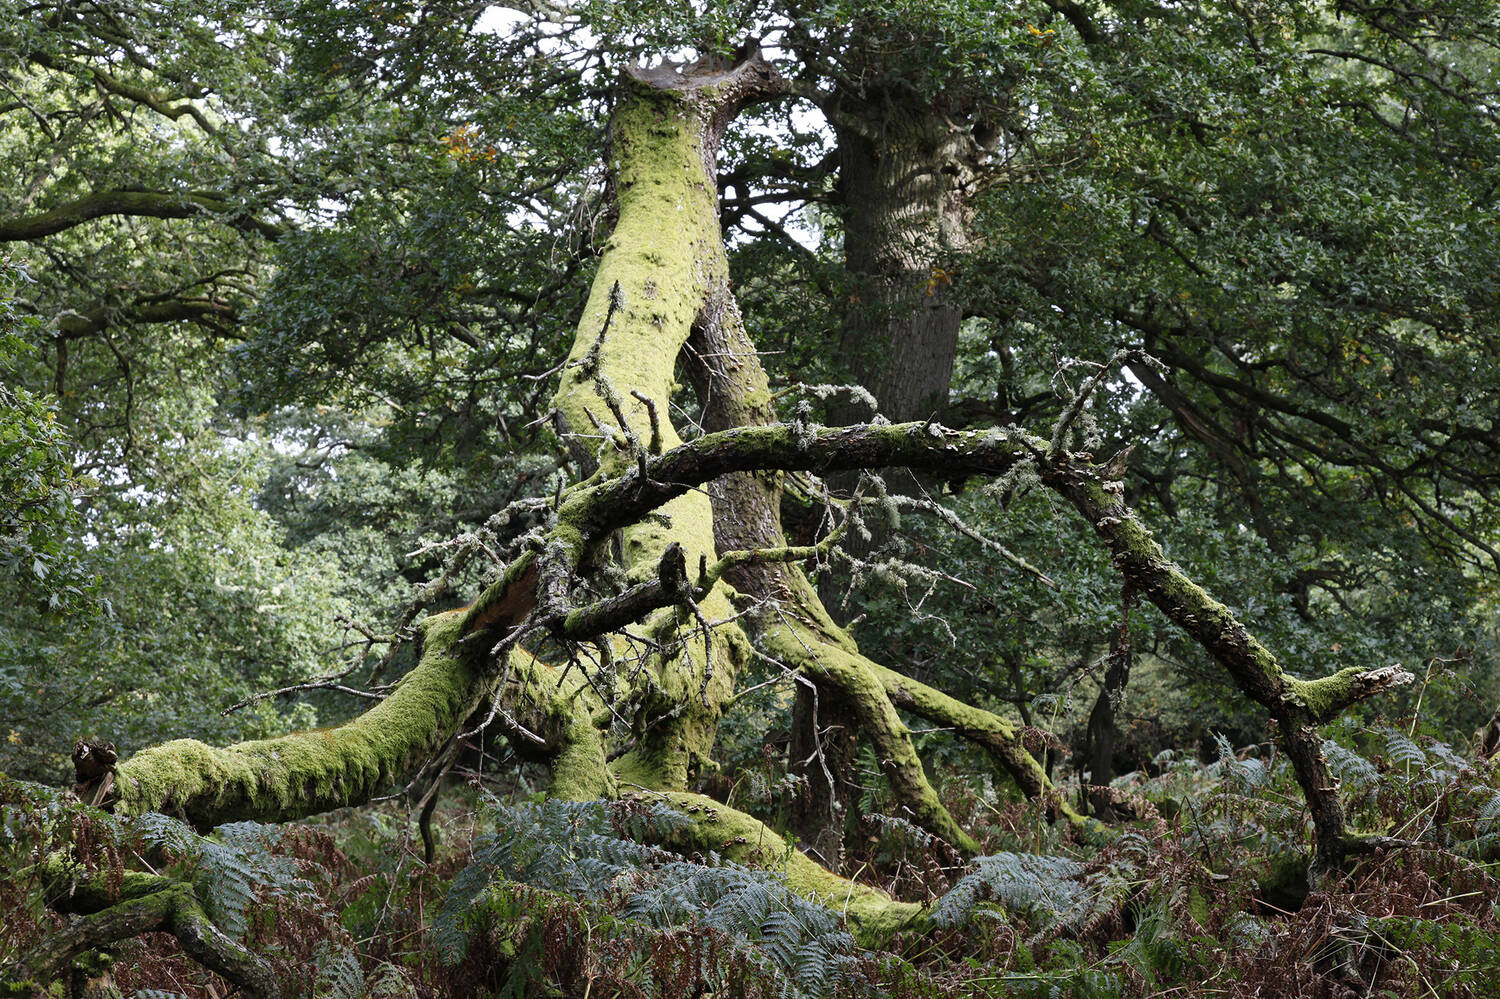 A view of an old, moss- and lichen-covered oak tree growing in a species-rich woodland.